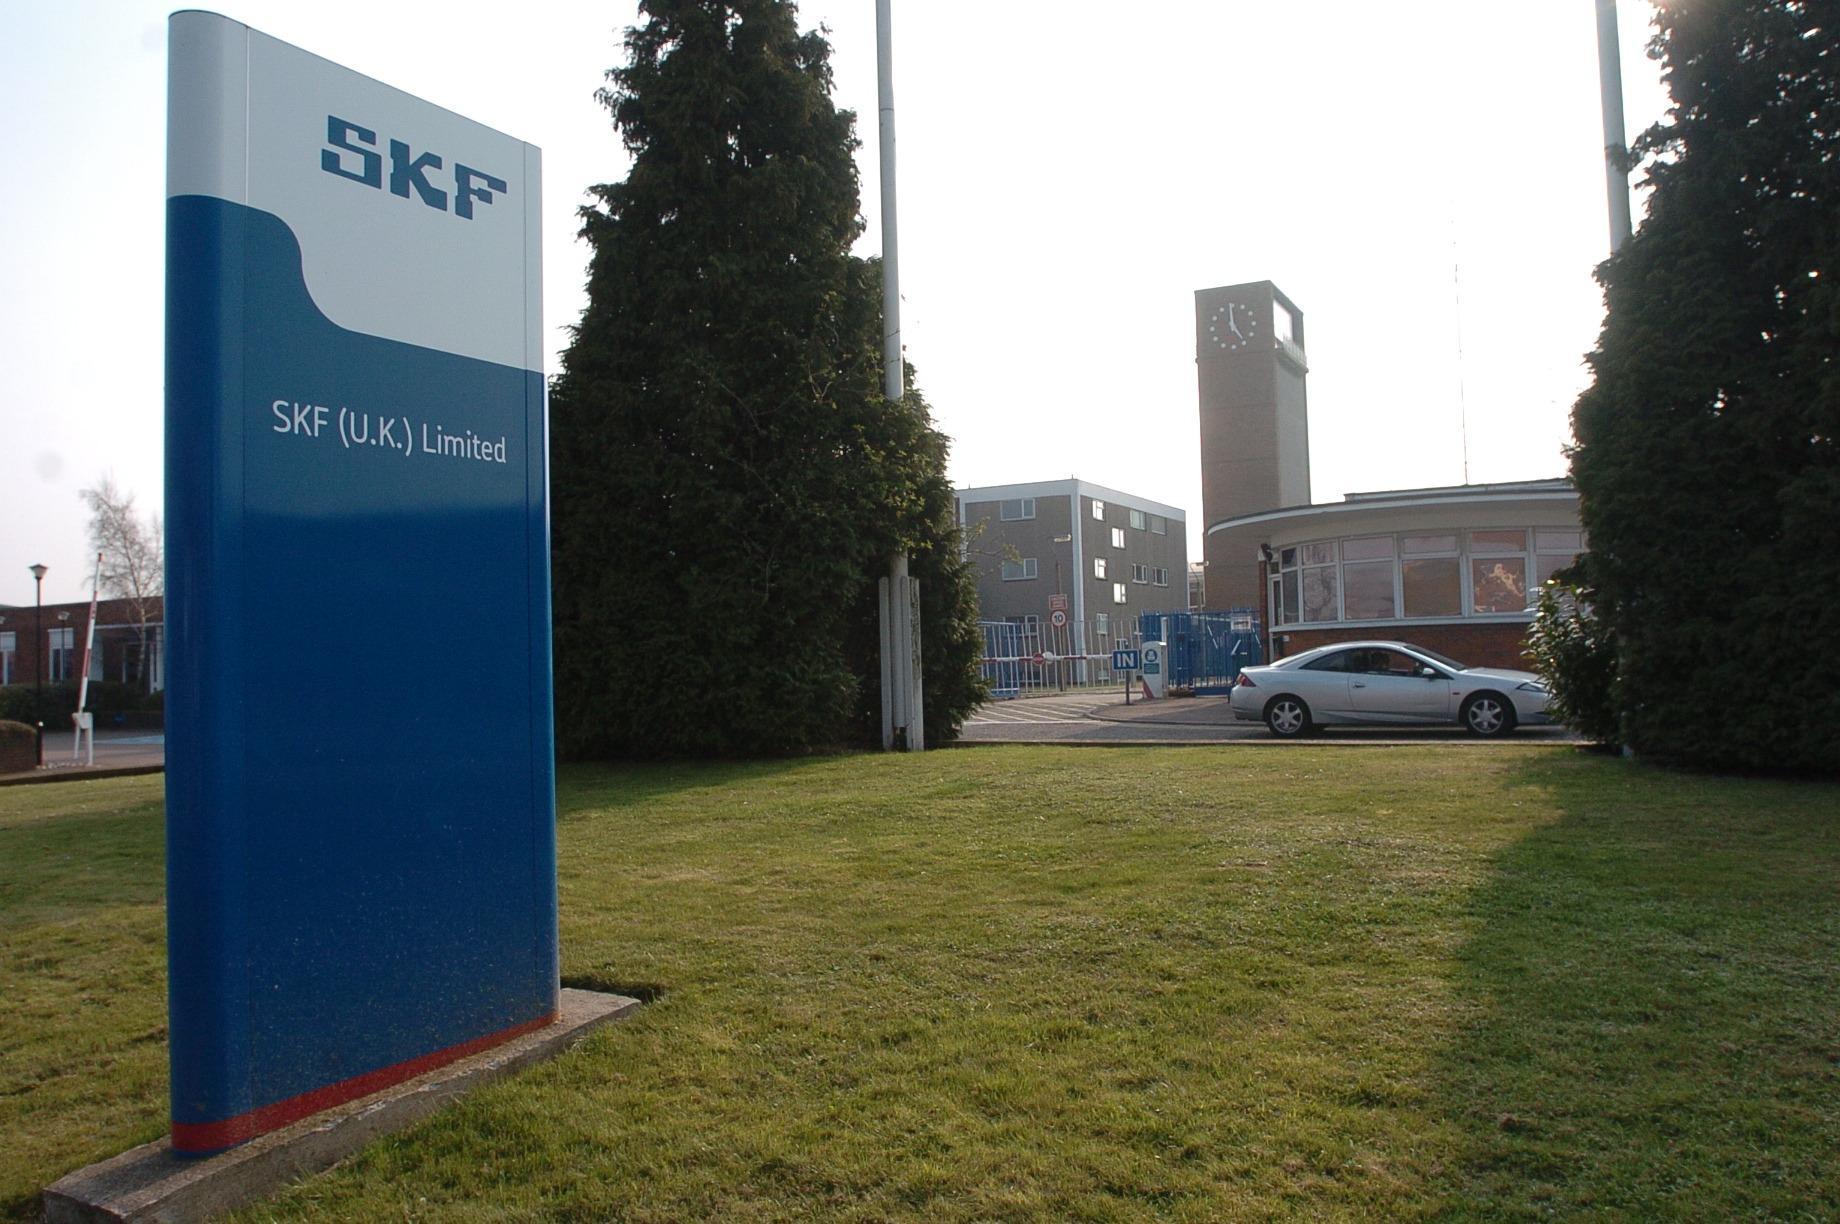 300 jobs at risk as SKF announces closure of Luton factory after more than 100 years in town